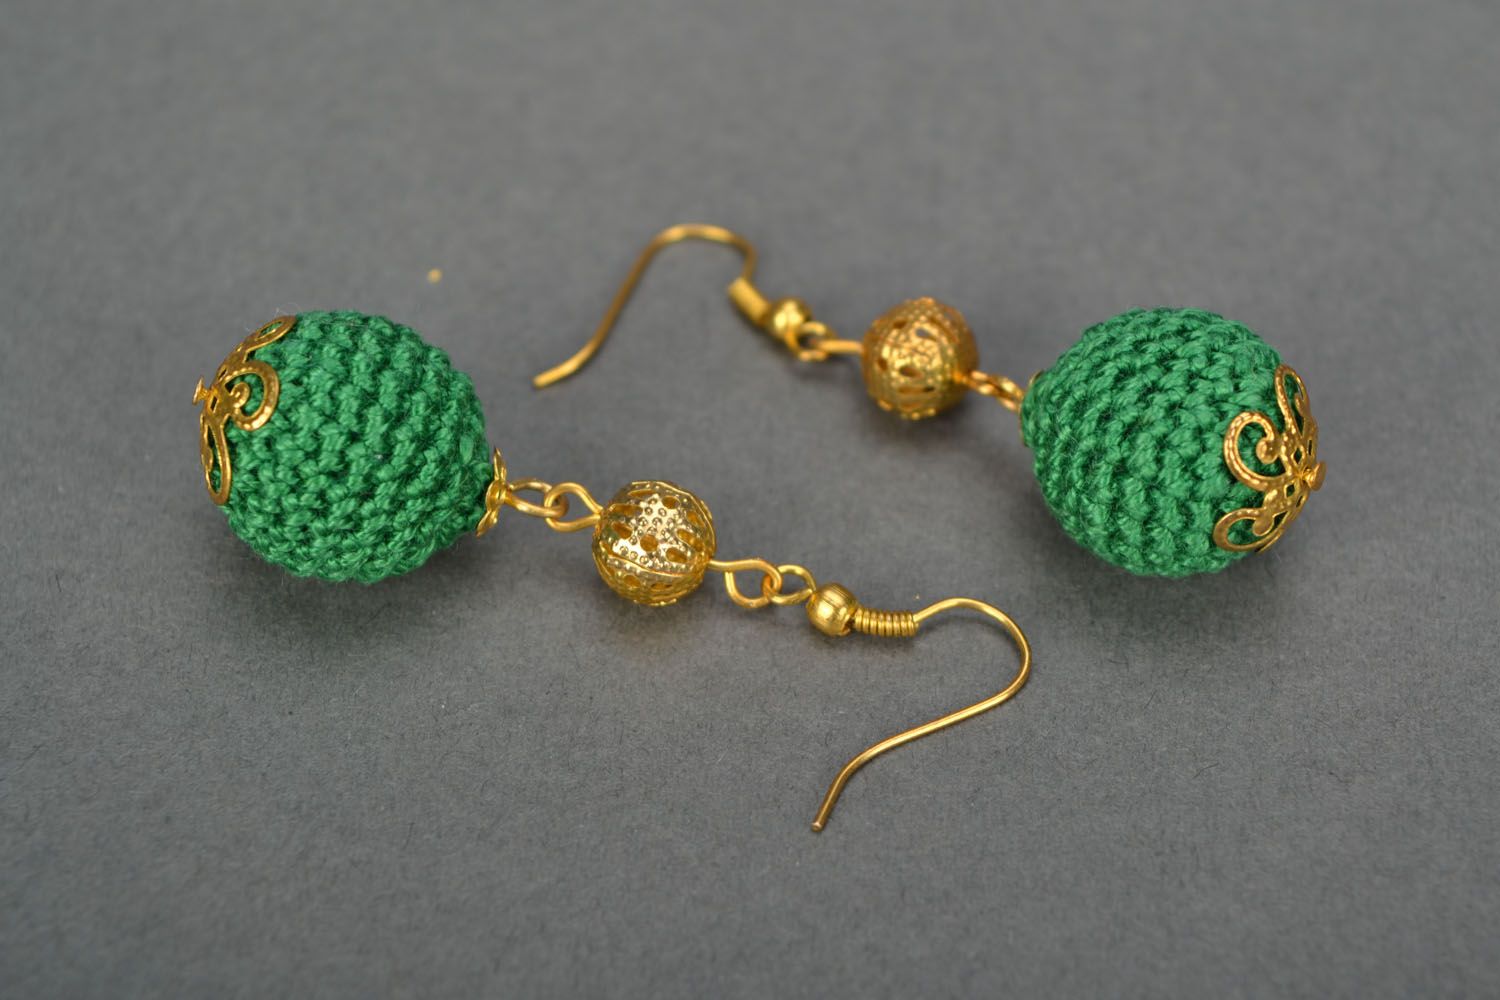 Crocheted earrings and necklace photo 4